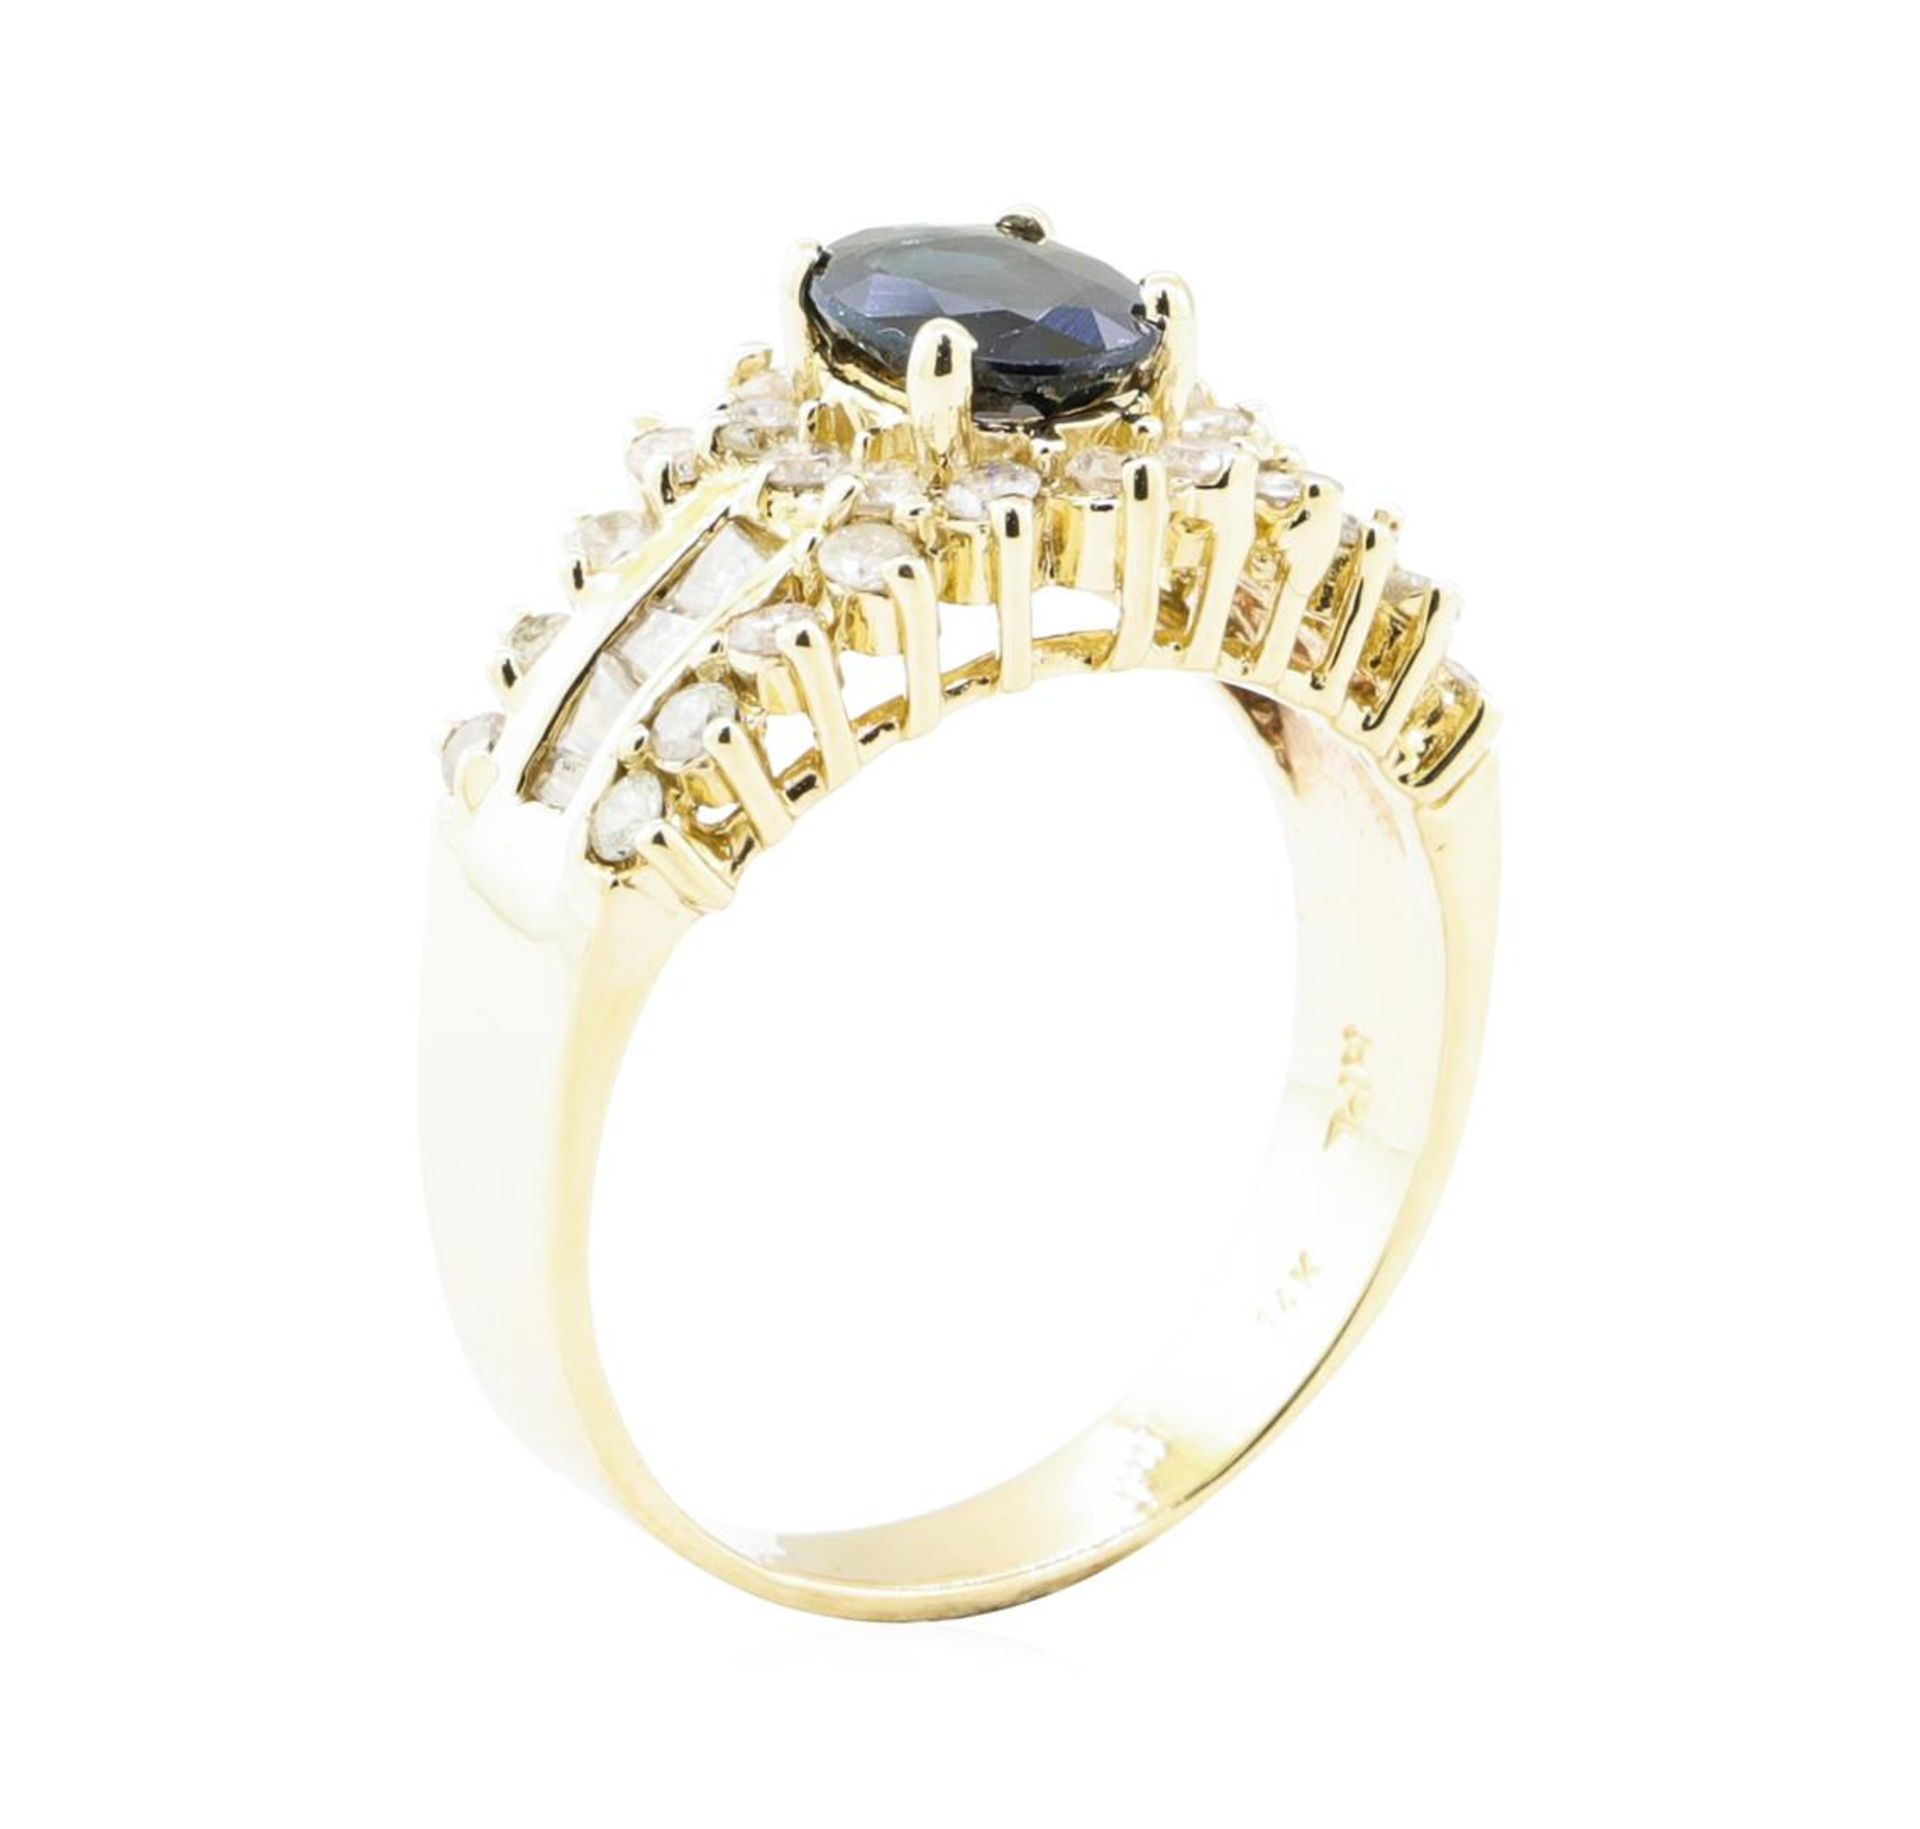 2.95 ctw Blue Sapphire And Diamond Ring - 14KT Yellow Gold - Image 4 of 5